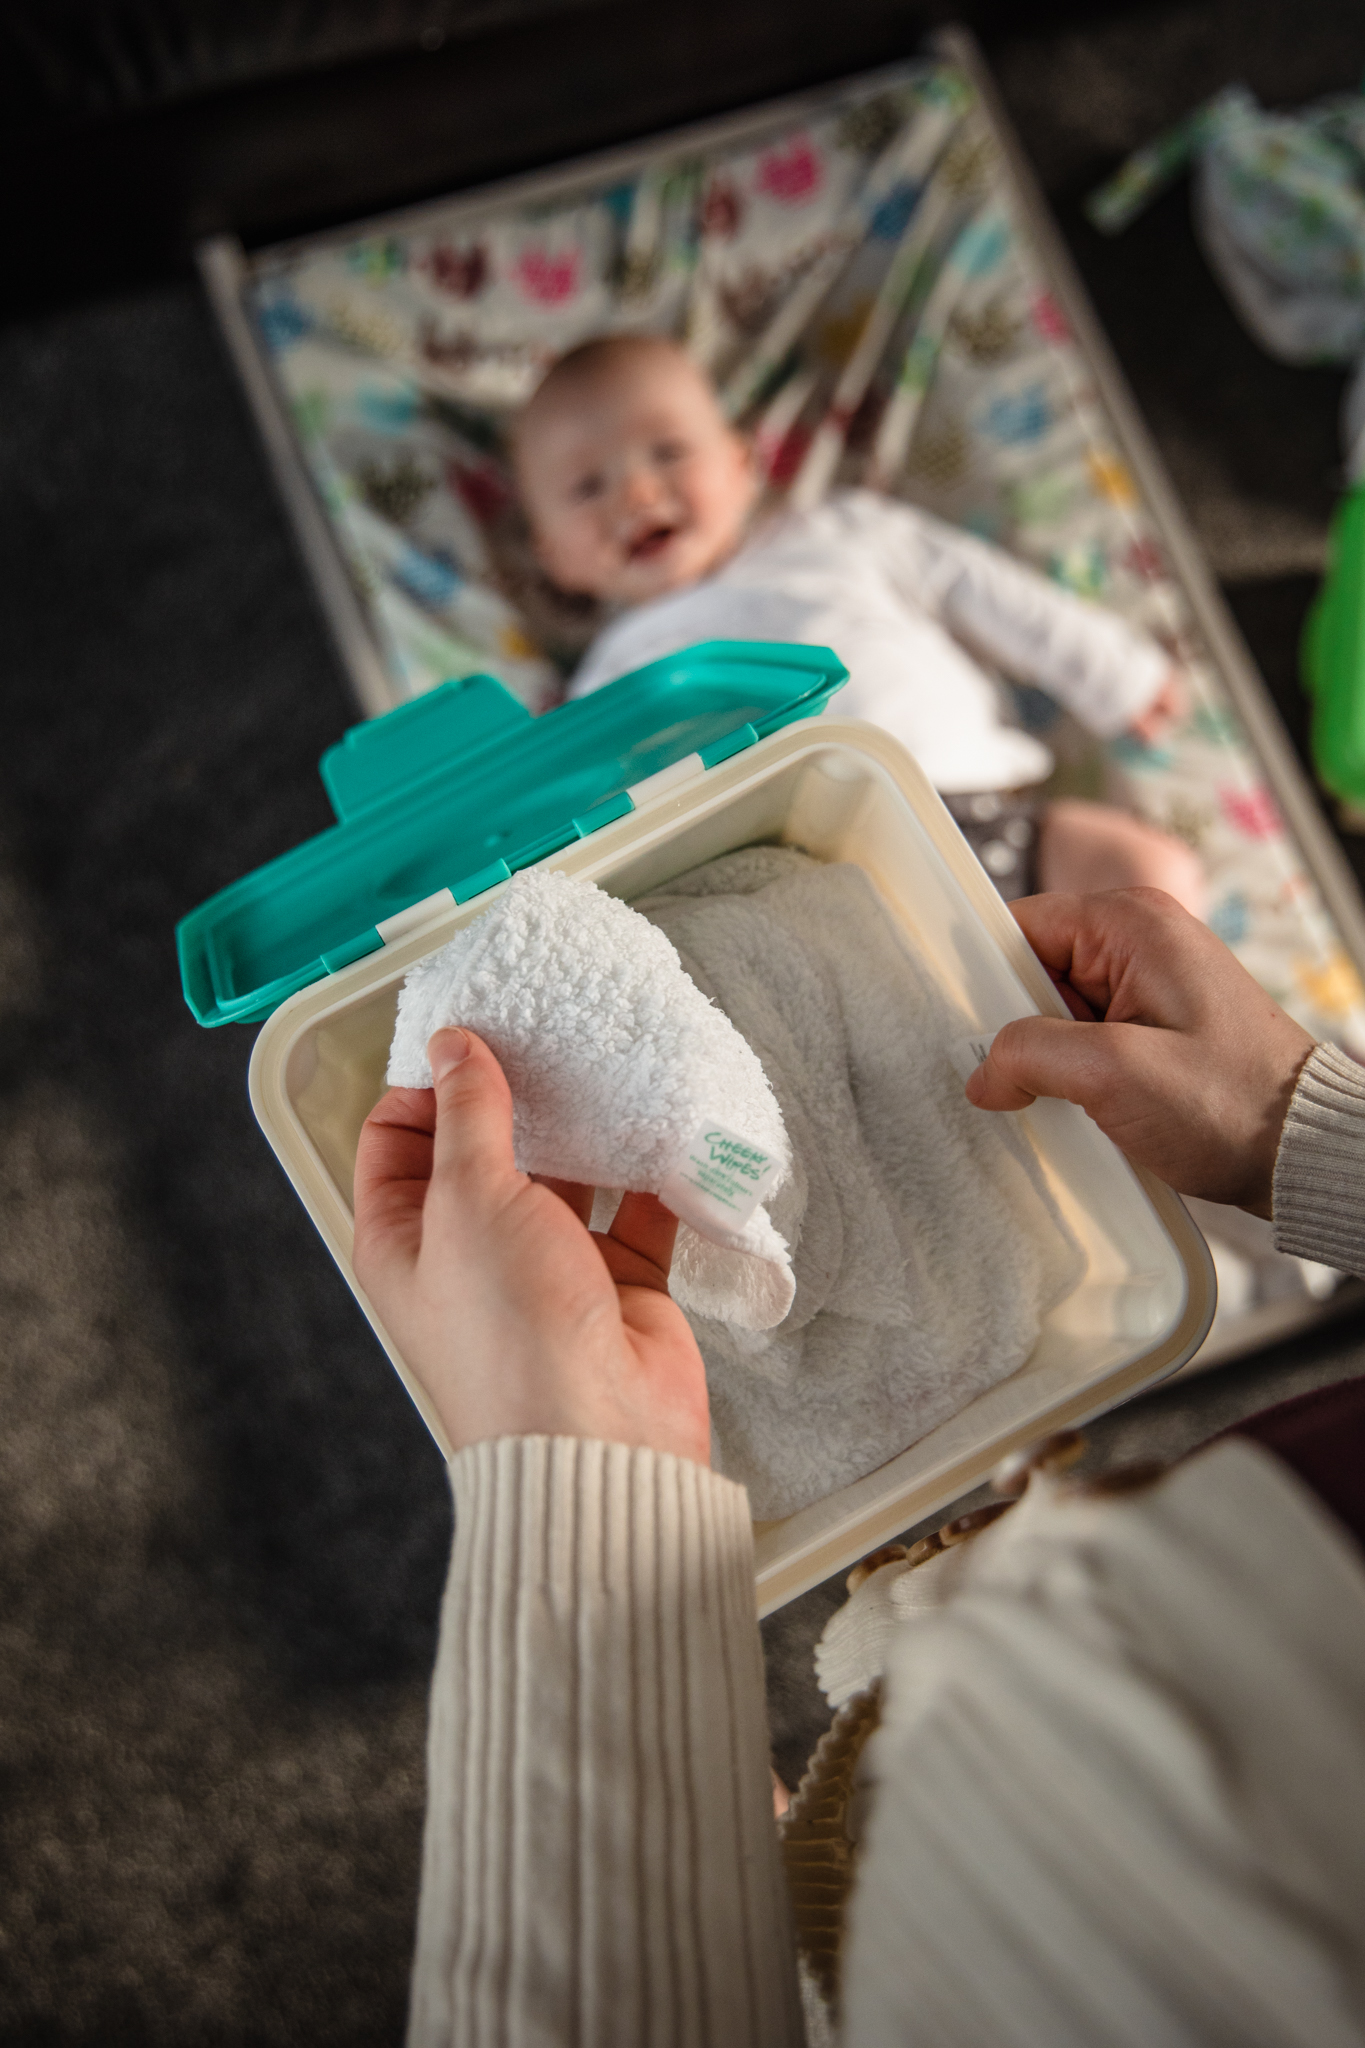 All-in-one reusable baby wipes kit 